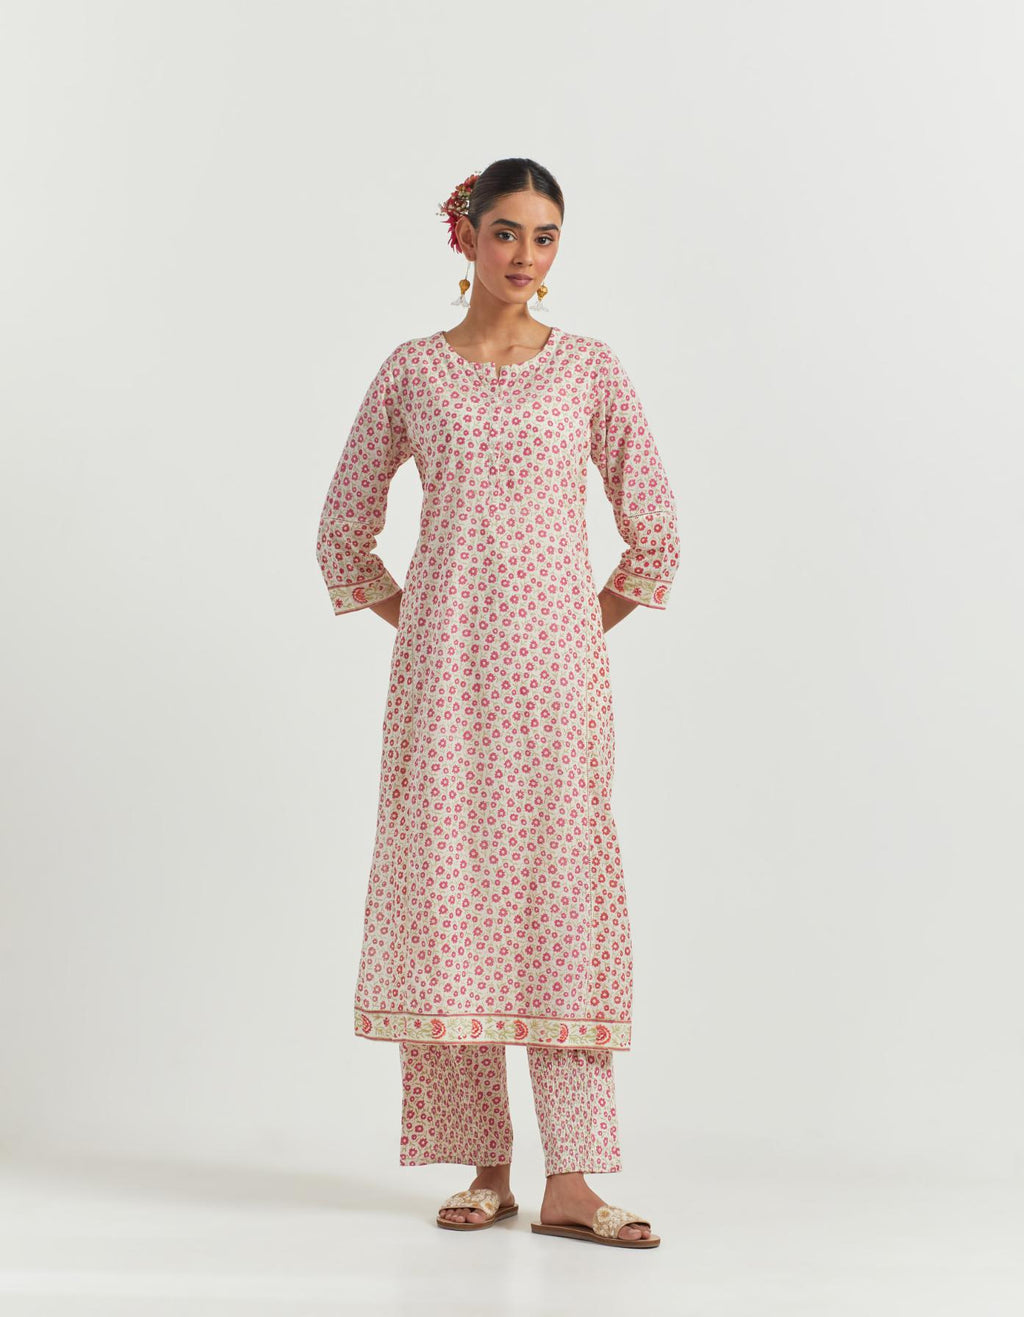 Multi colored cotton hand-block printed kurta set with side panels, detailed with off white ladder lace detailing at side panels.